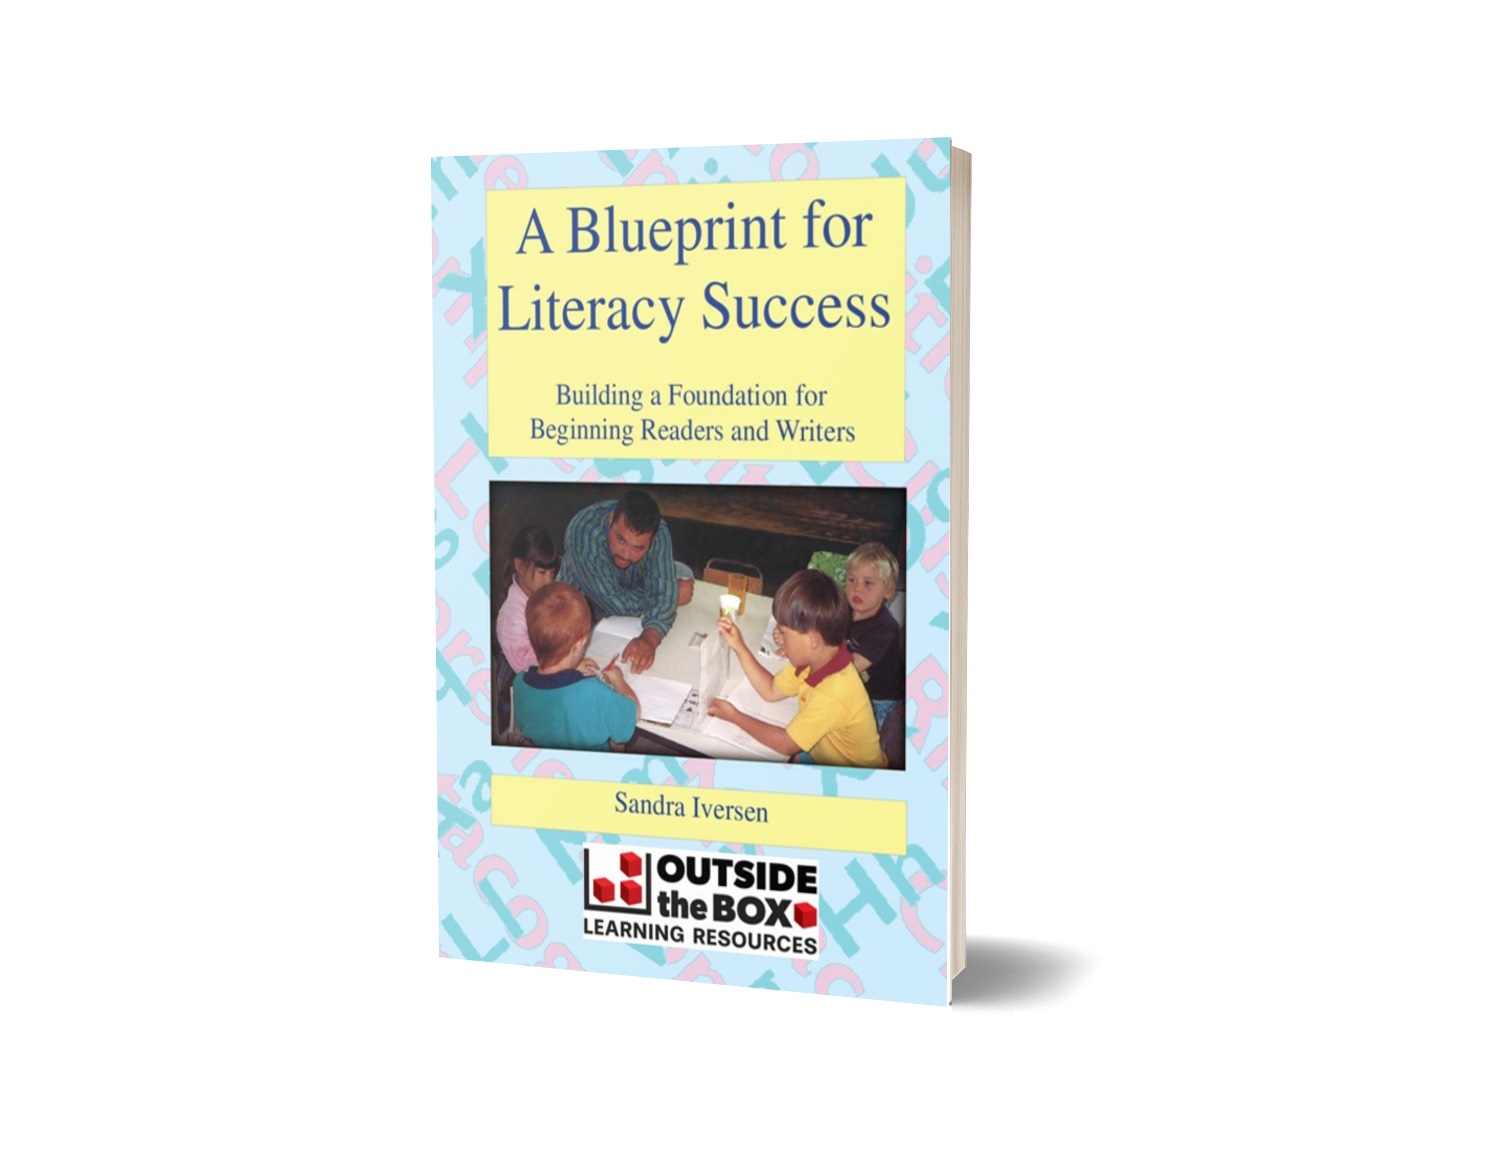 Blueprint　Literacy　Learning　for　Box　Success,　the　Outside　A　Resources